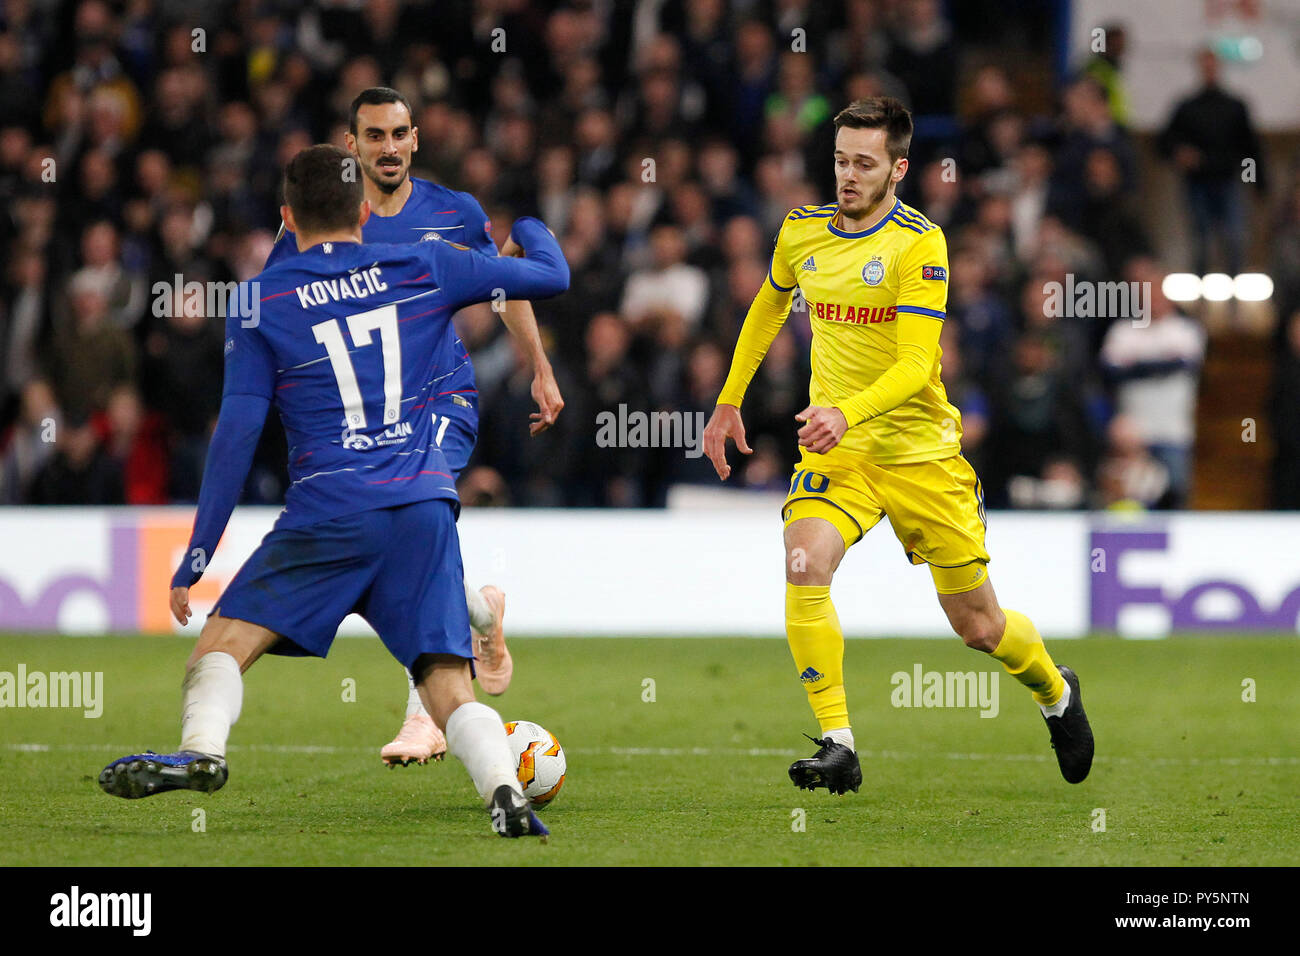 London, UK. 25th Oct 2018. Mirko Ivanic of BATE Borisov and Mateo Kovačić  of Chelsea contest a ball during the UEFA Europa League group stage match  between Chelsea and FC BATE Borisov